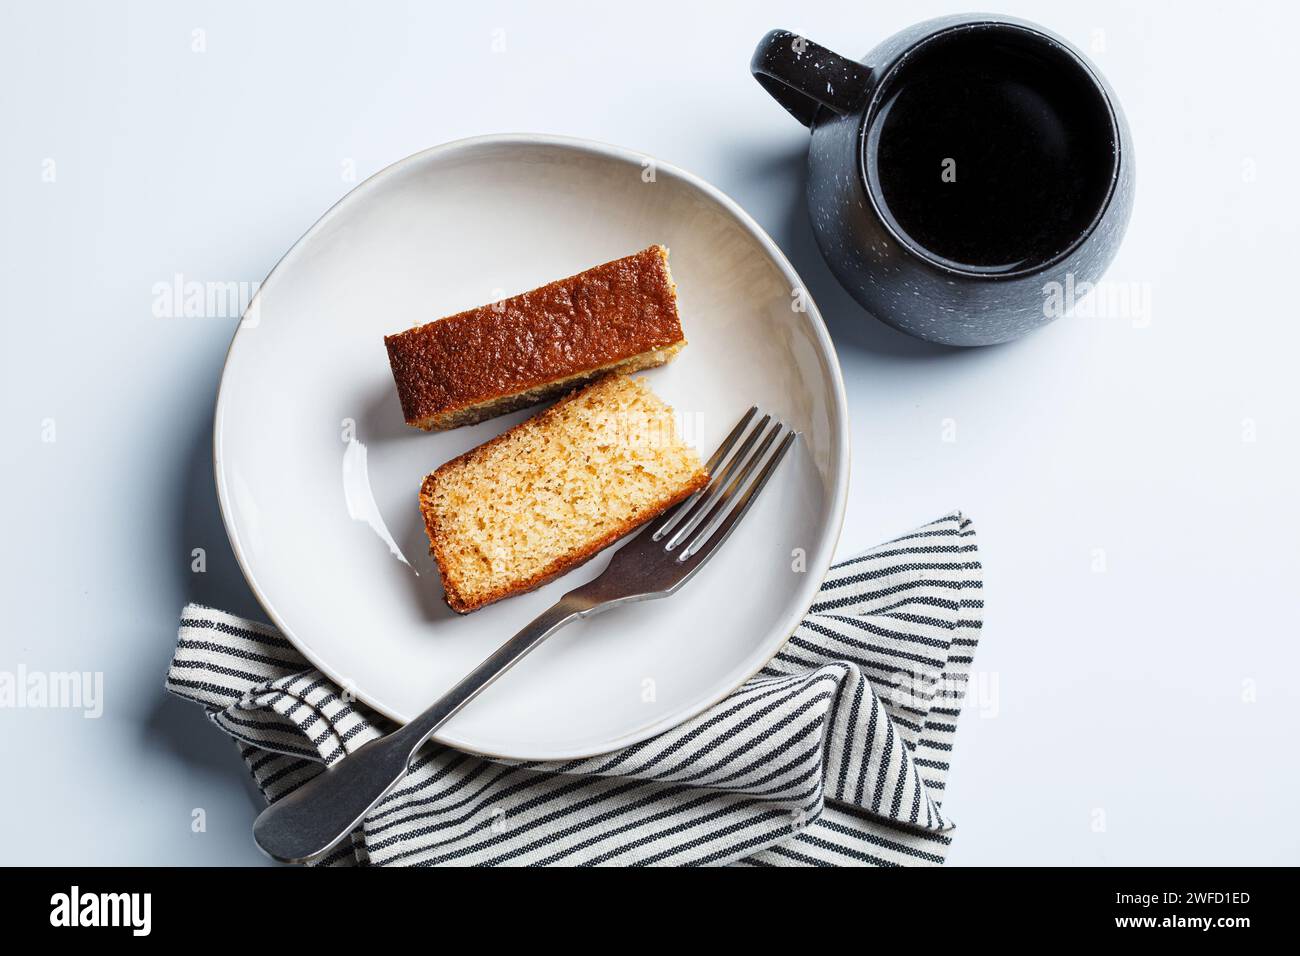 Pieces of breakfast citrus pound cake and a cup of coffee, white background. Stock Photo